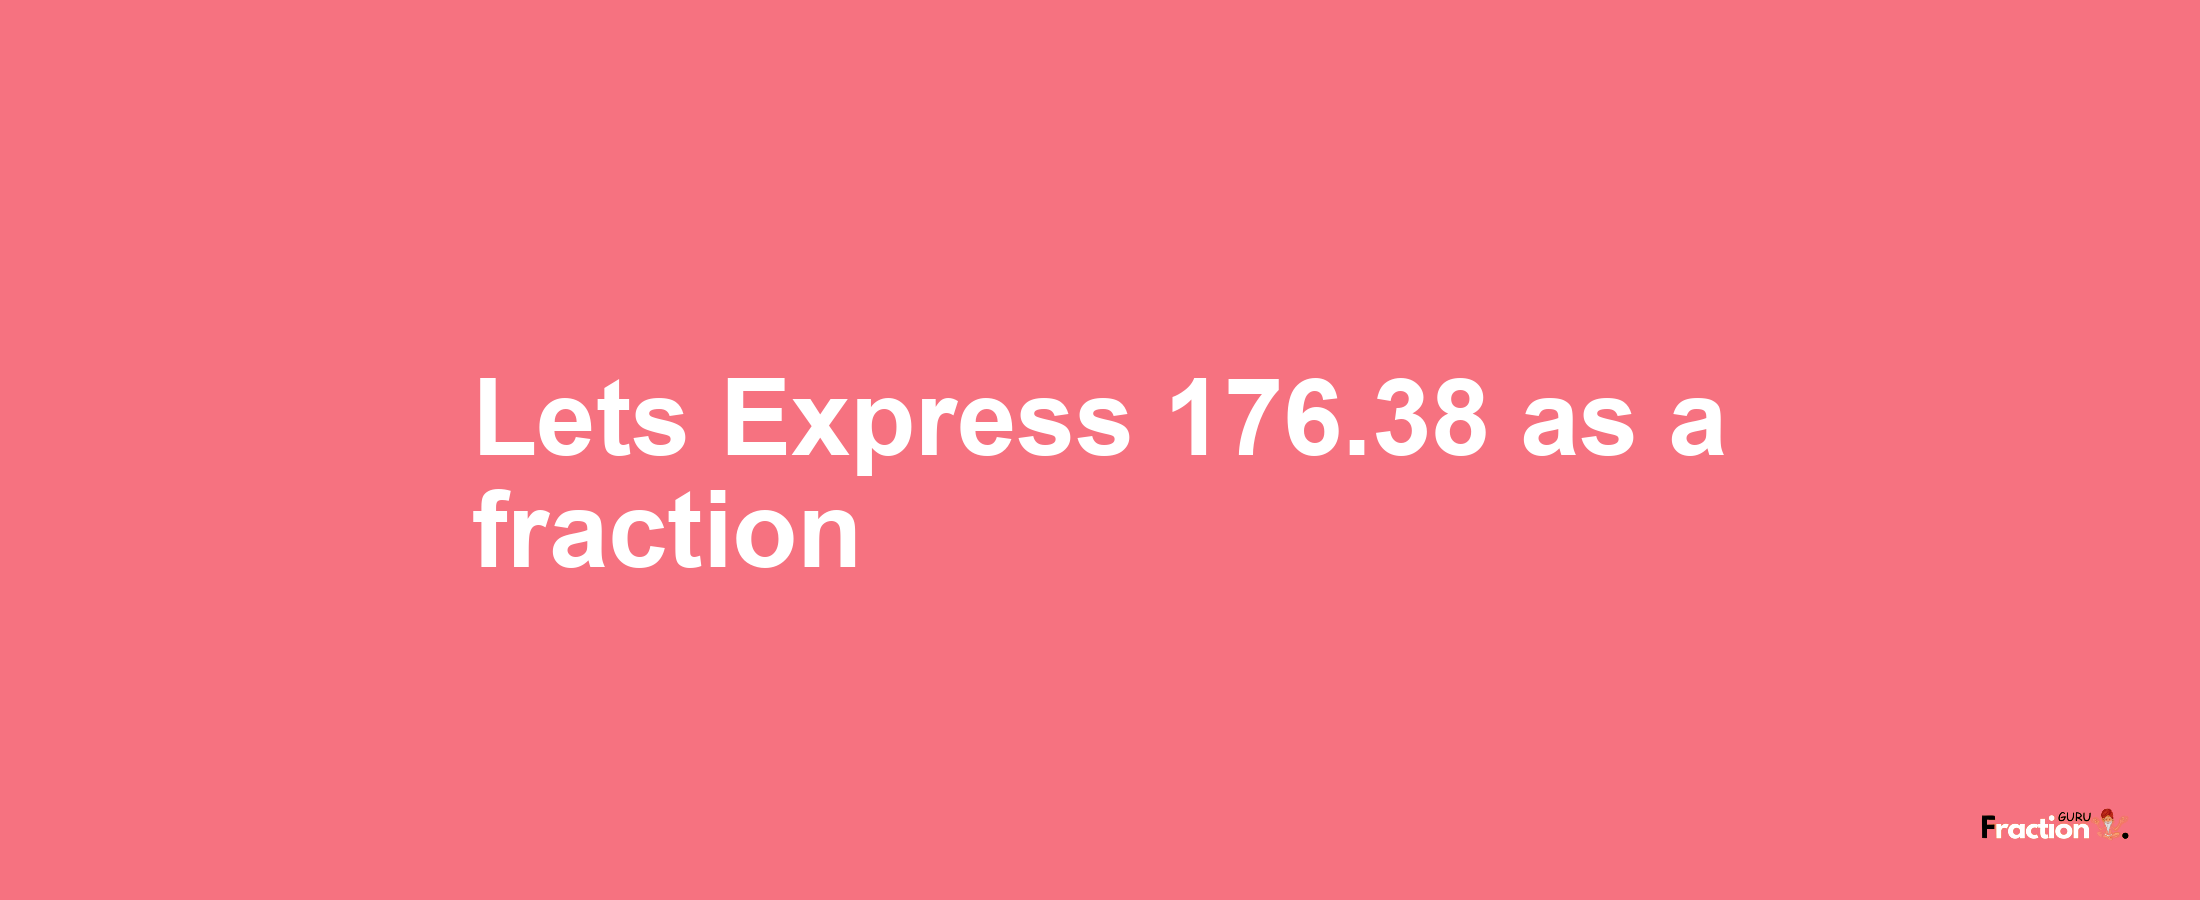 Lets Express 176.38 as afraction